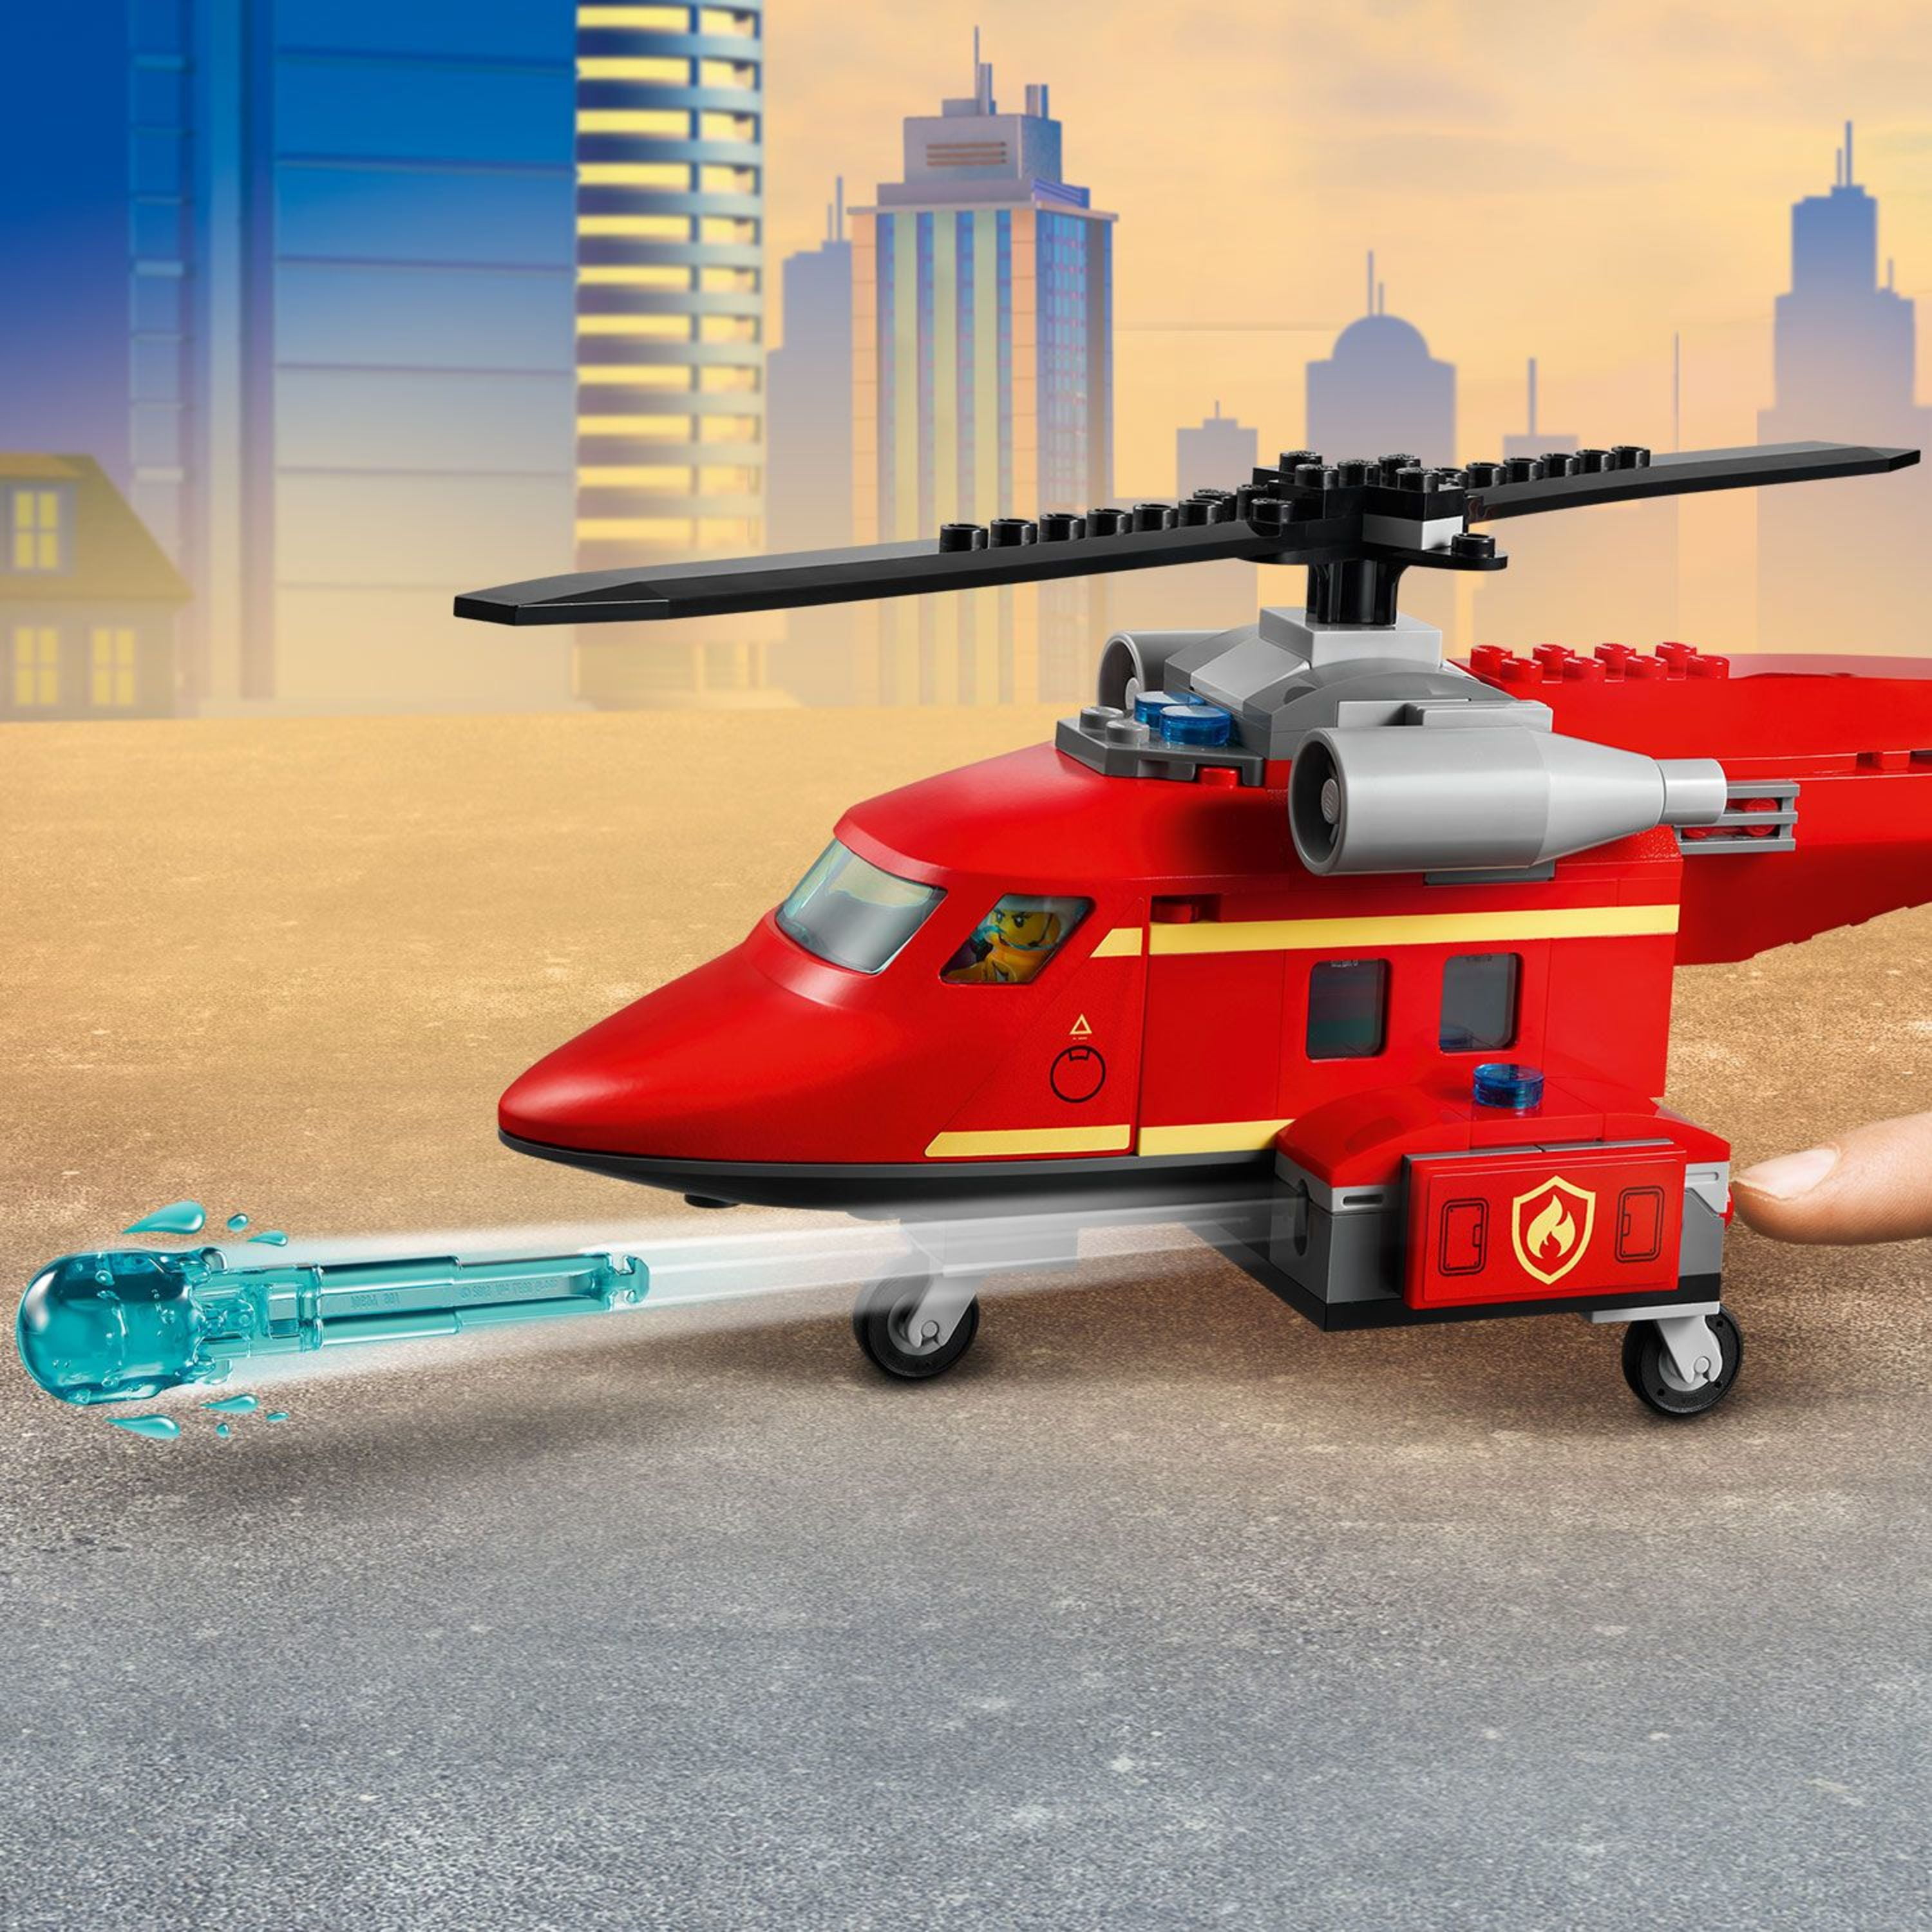 LEGO City Fire Rescue Helicopter 60281 Firefighter Building Toy